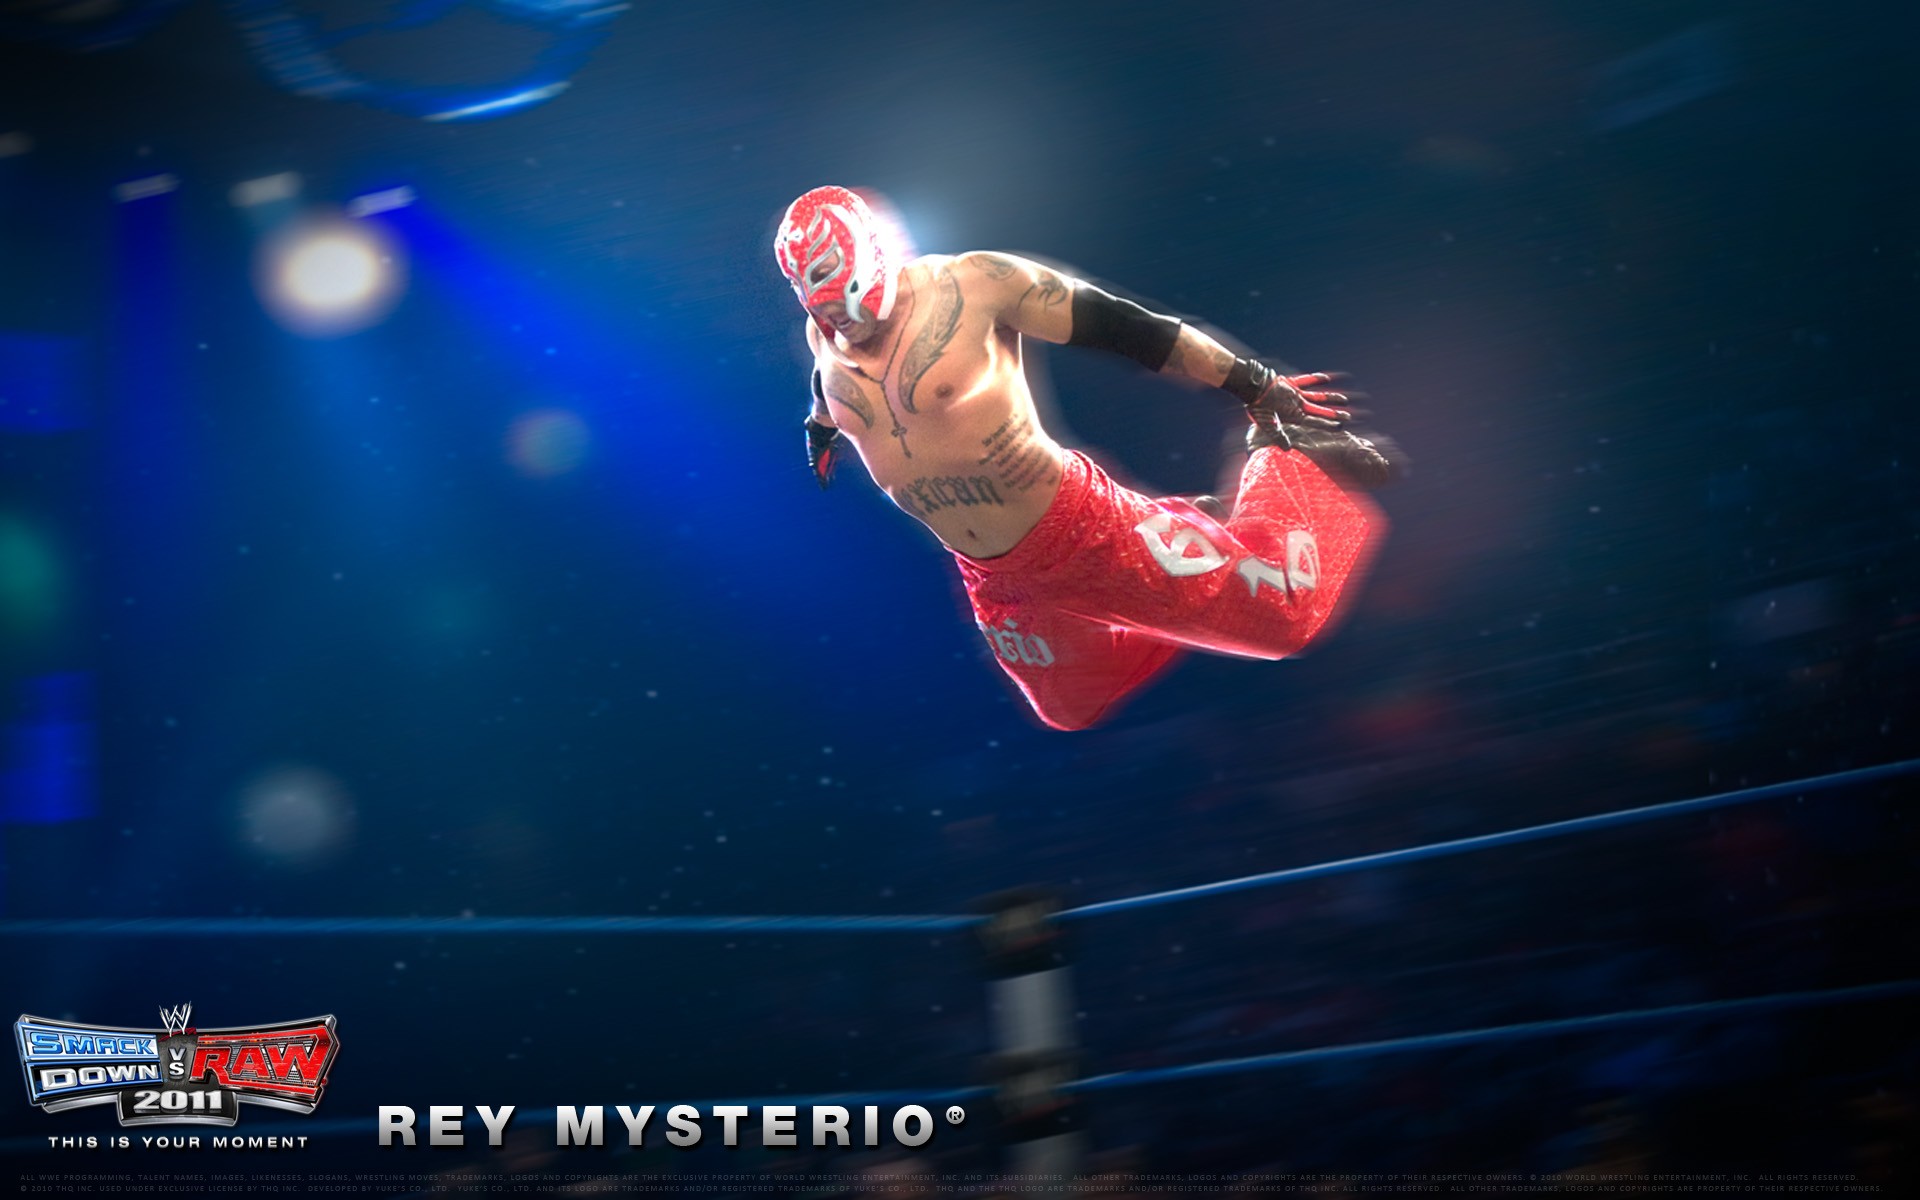 The Rey Mysterio Wallpaper iPhone